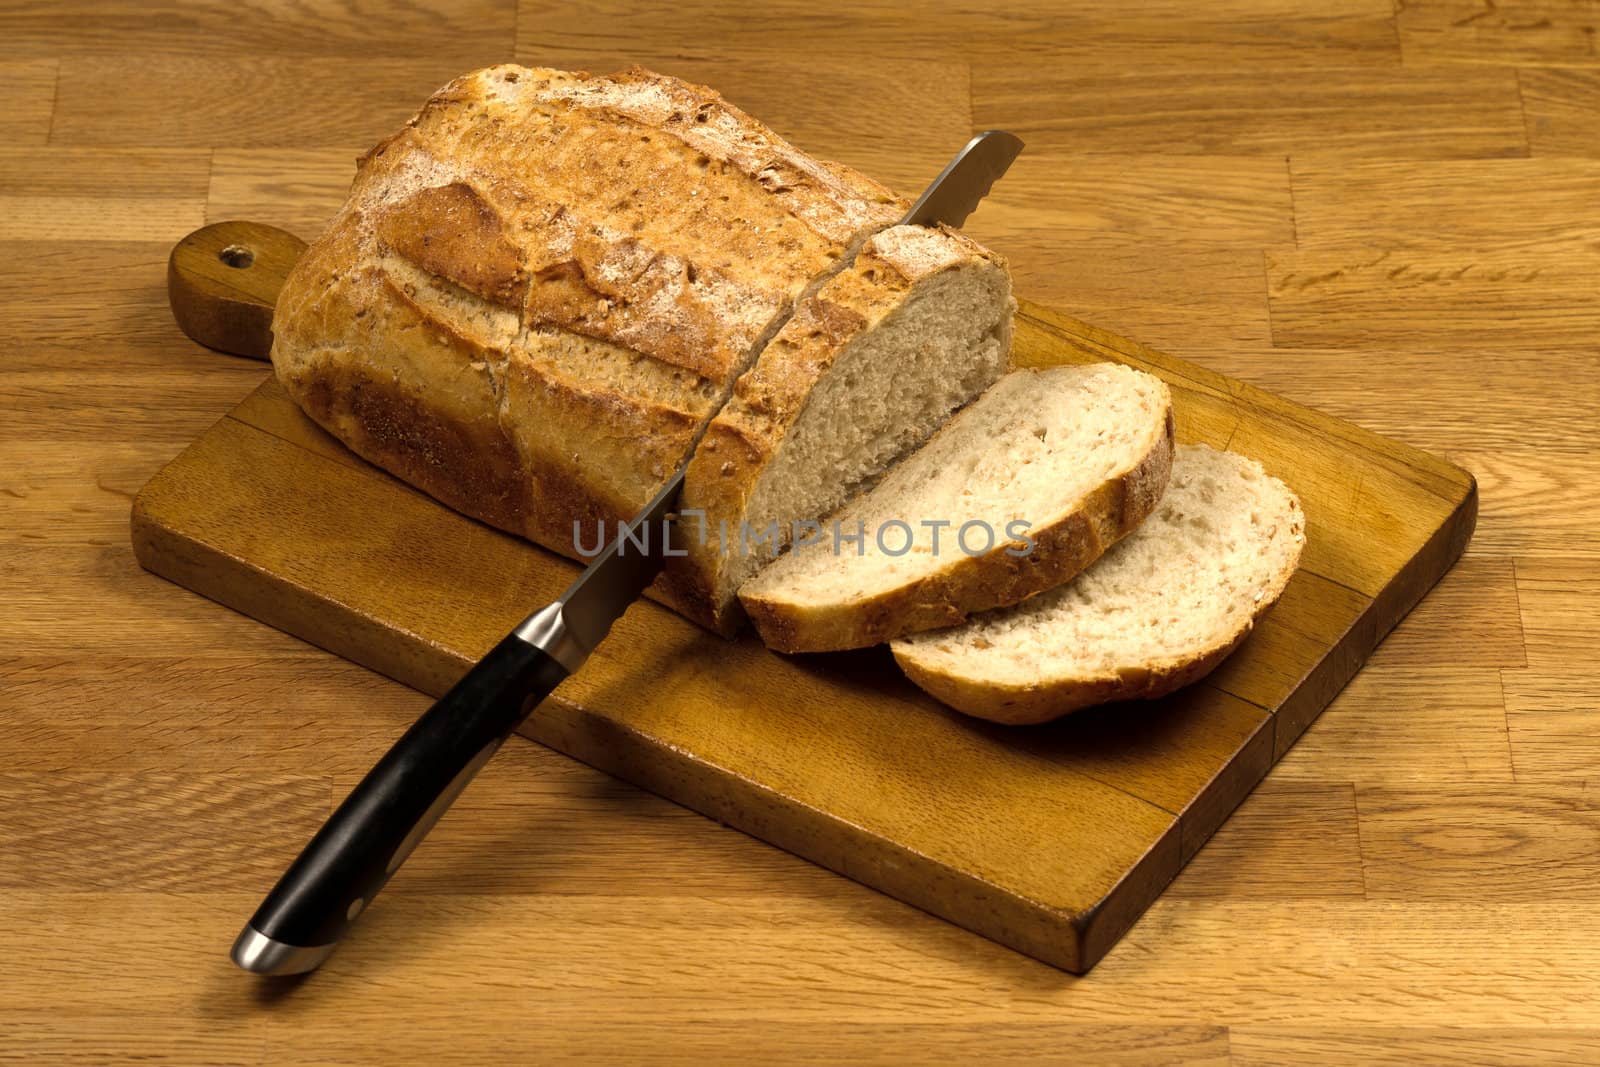 Wooden cutting board with white bread and knife by lavsen